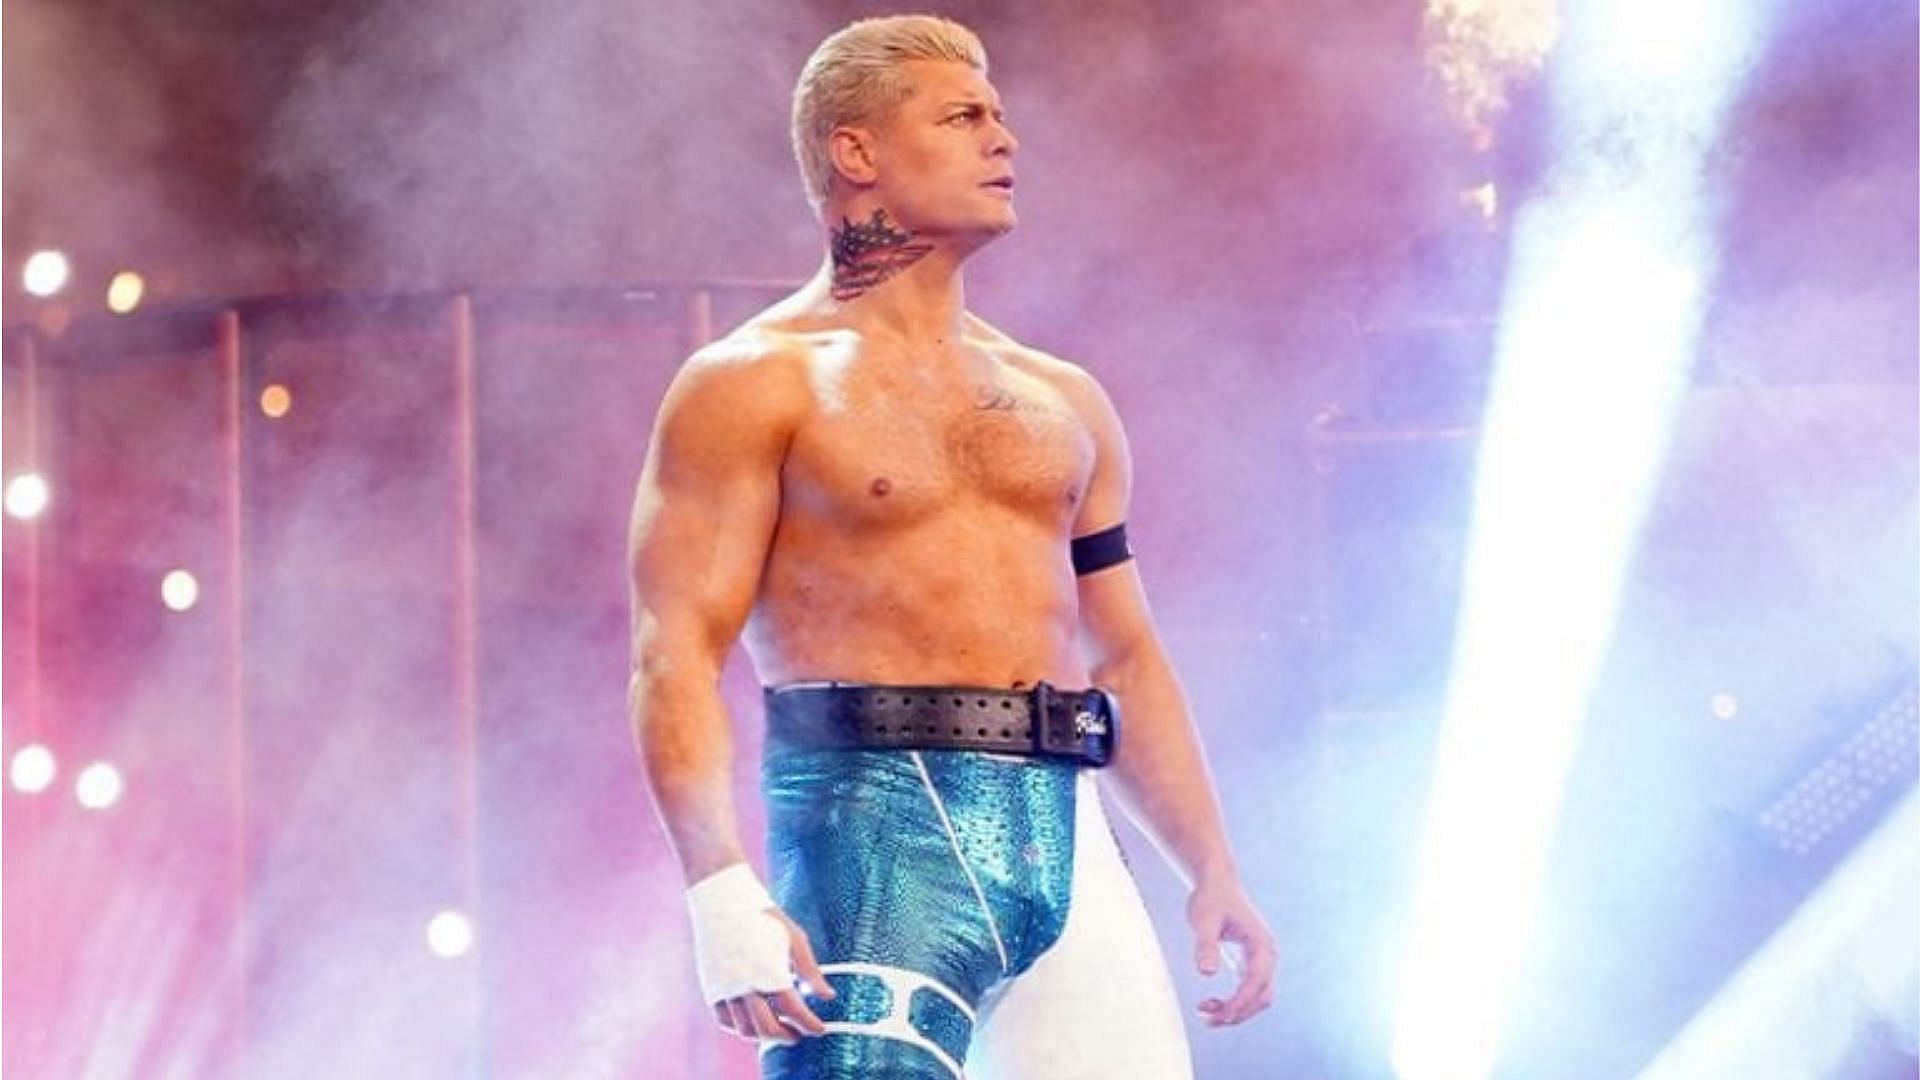 Cody Rhodes is currently a free agent after his AEW contract expired